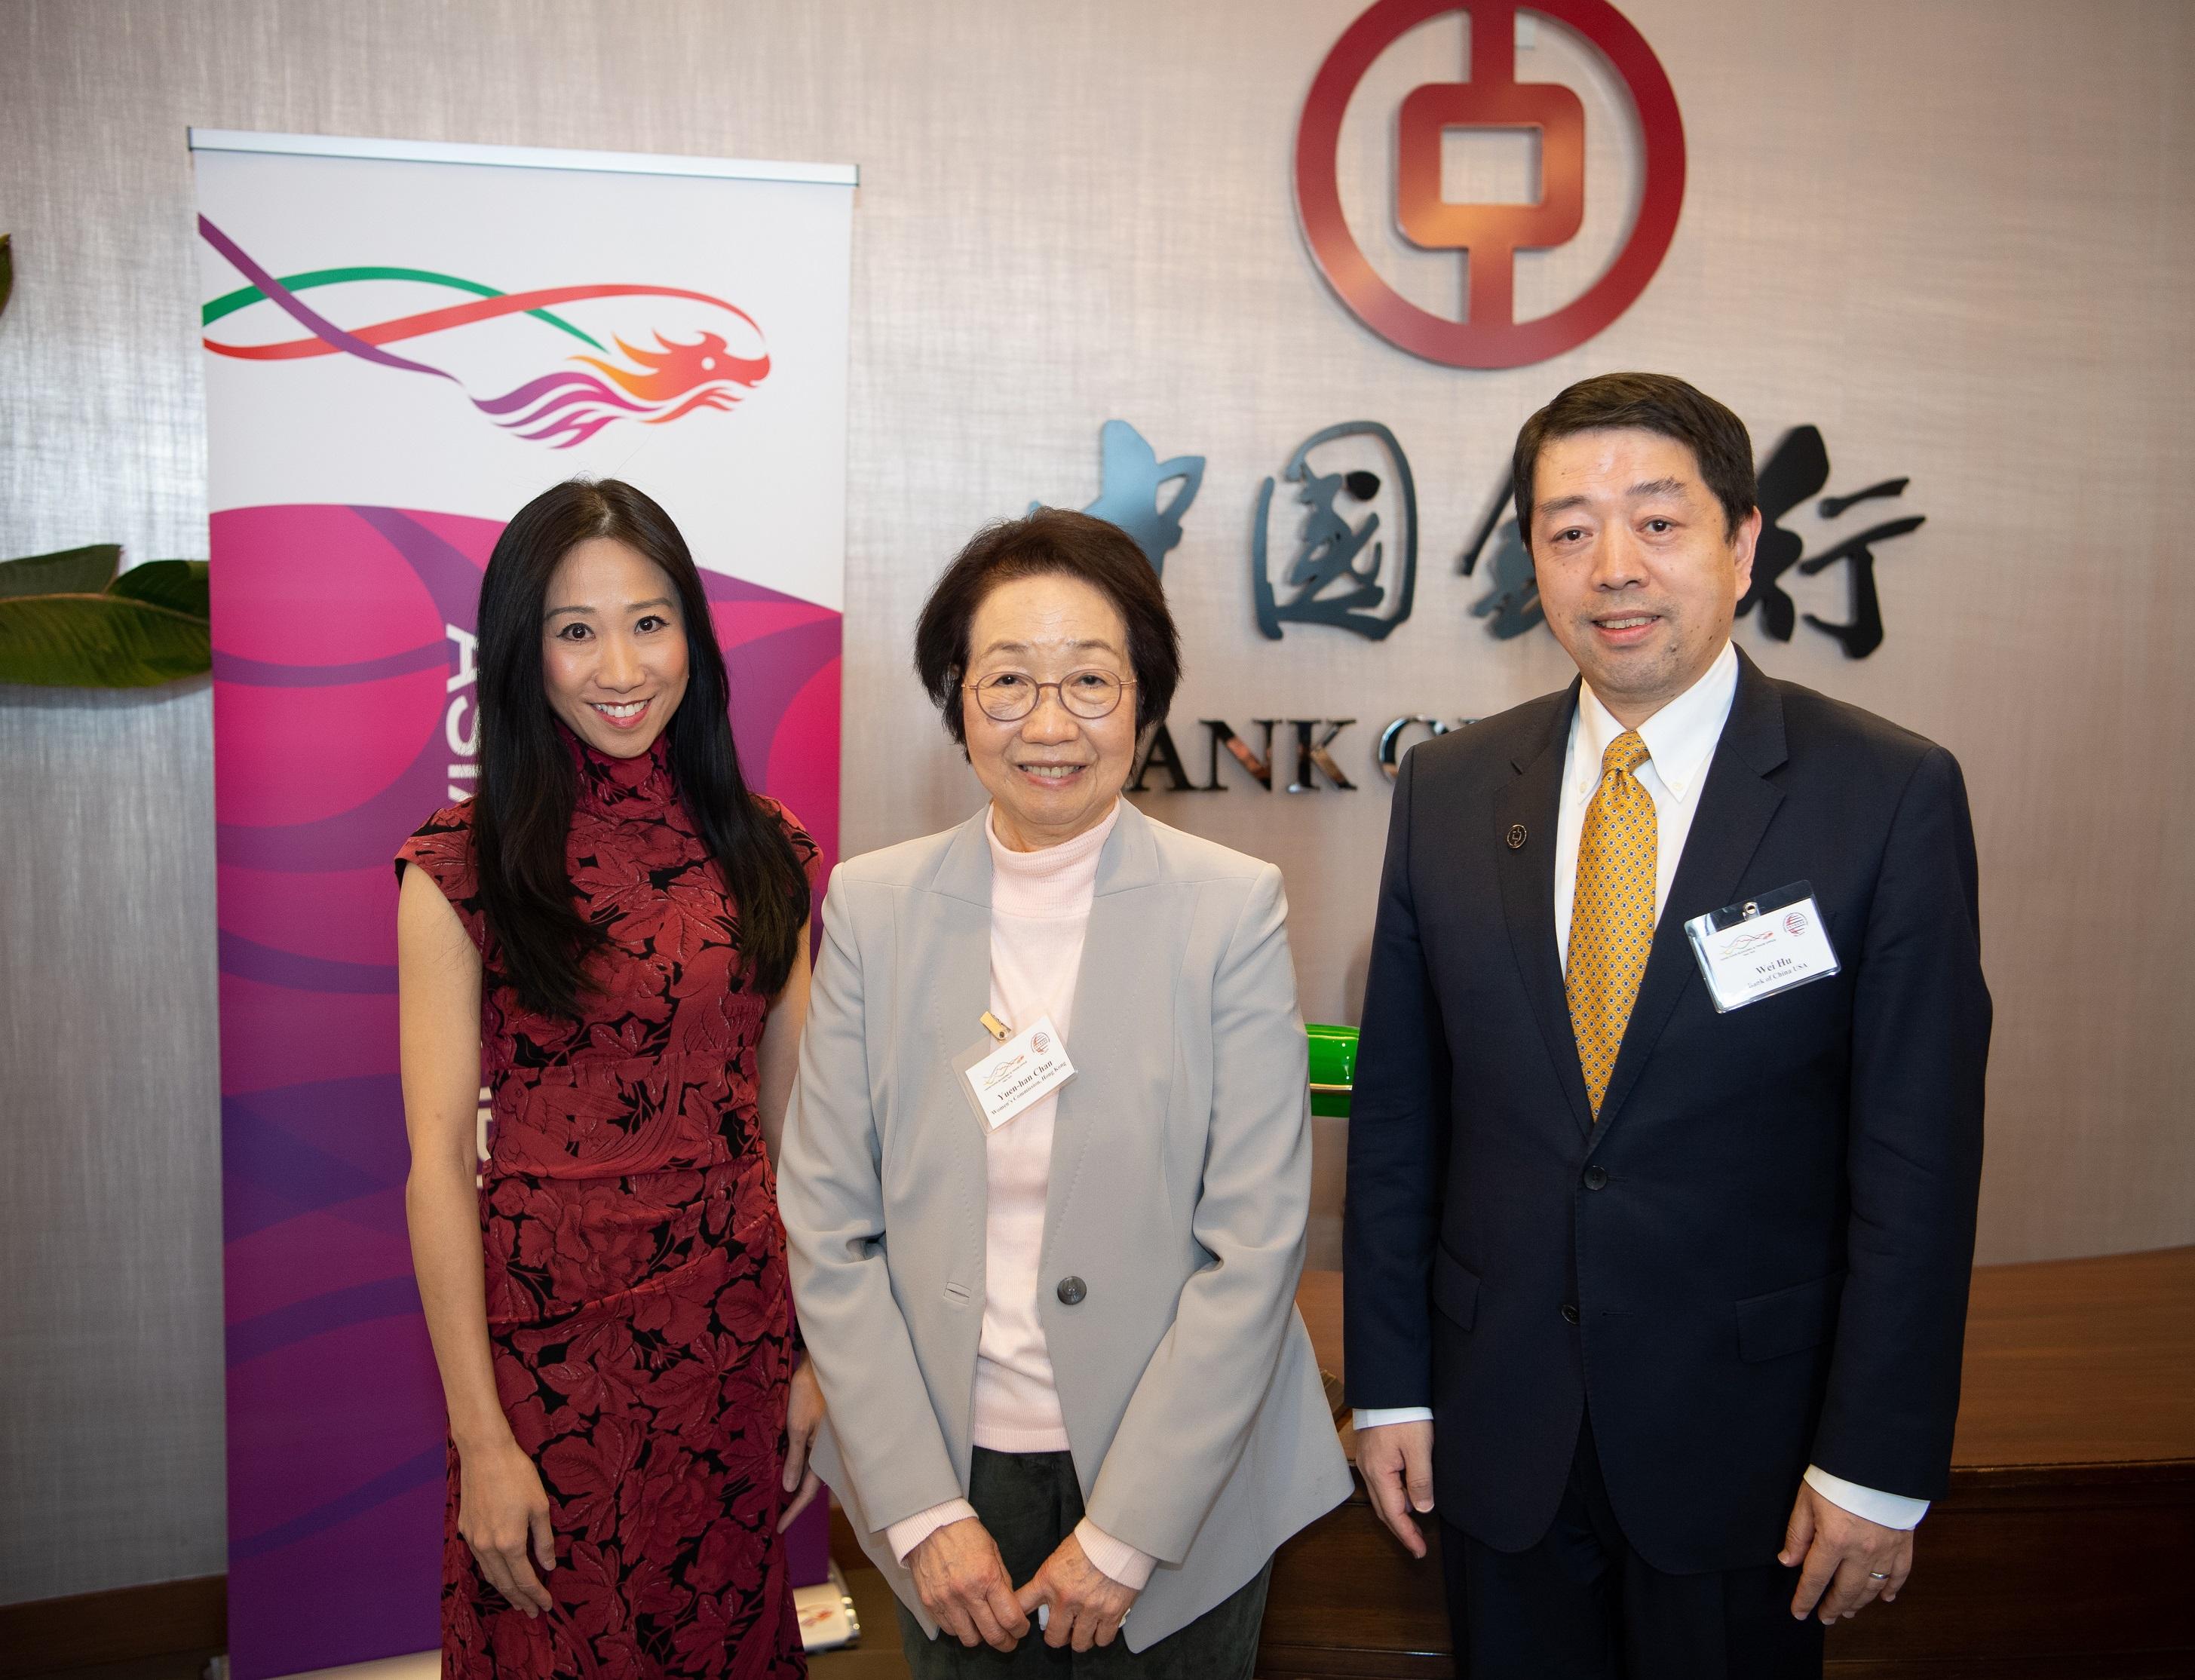 To celebrate International Women's Day, the Hong Kong Economic and Trade Office in New York (HKETONY) co-organised a lunch reception themed "Empowered Women, Empowering Women" with the China General Chamber of Commerce - USA (CGCC) on March 8 (New York time), attracting more than 40 women leaders from think tanks, the business community, creative industry and sports sector in New York. The Chairwoman of the Women's Commission in Hong Kong, Ms Chan Yuen-han (centre), who was attending the 67th session of the United Nations Commission on the Status of Women in New York City, was a special guest at the luncheon. Picture also shows the Director of the HKETONY, Ms Candy Nip (left), and the Chairman of the CGCC cum President and Chief Executive of Bank of China, USA, Mr Hu Wei (right).